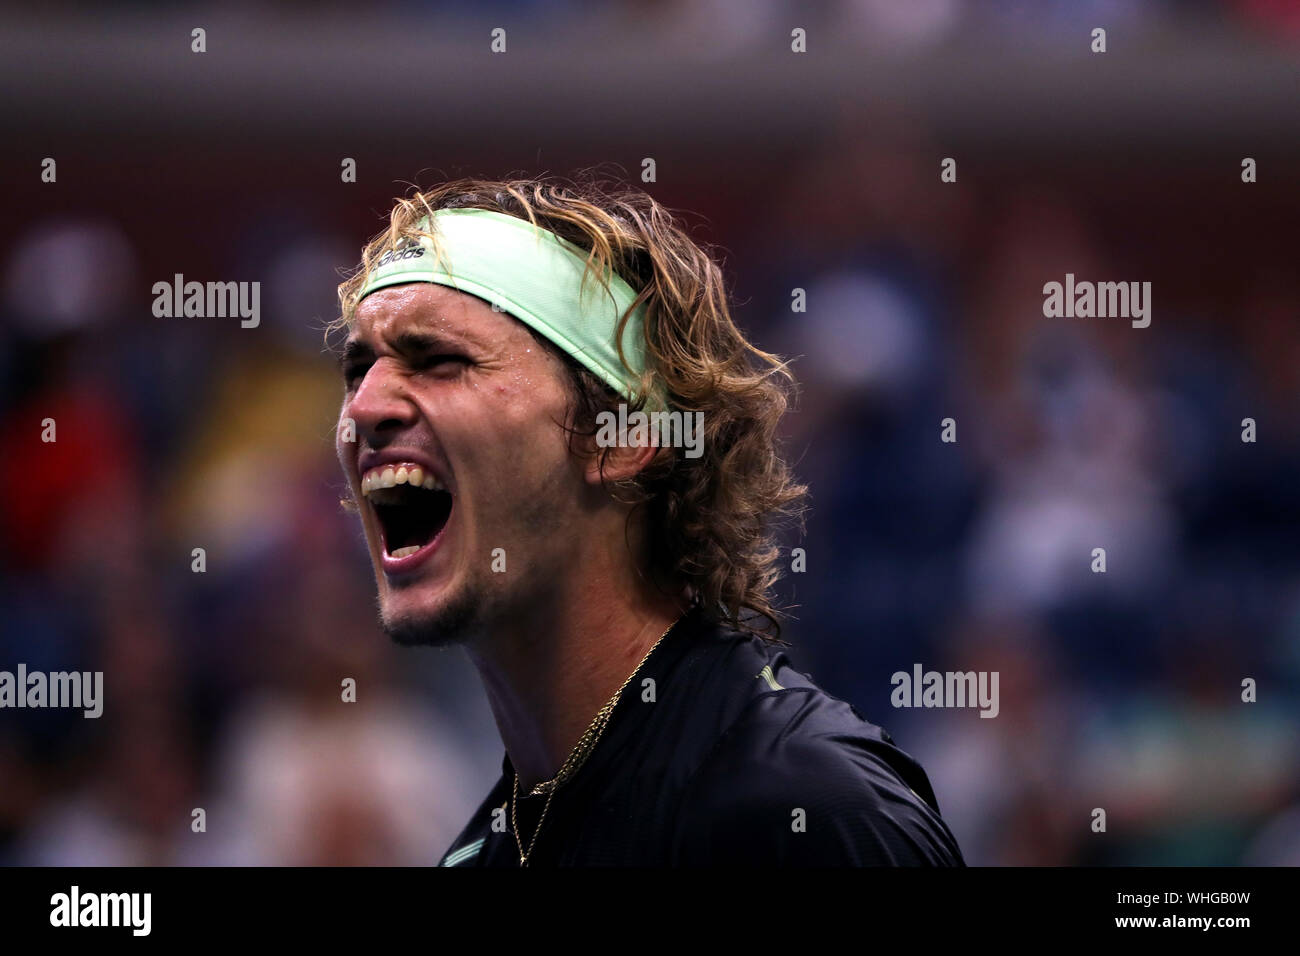 New York, United States. 02nd Sep, 2019. Flushing Meadows, New York, United States - September 2, 2019. Number 6 seed Alexander Zverev of Germany reacts to point during his fourth round match against Diego Schwartzman of Argentina at the US Open today. Credit: Adam Stoltman/Alamy Live News Stock Photo